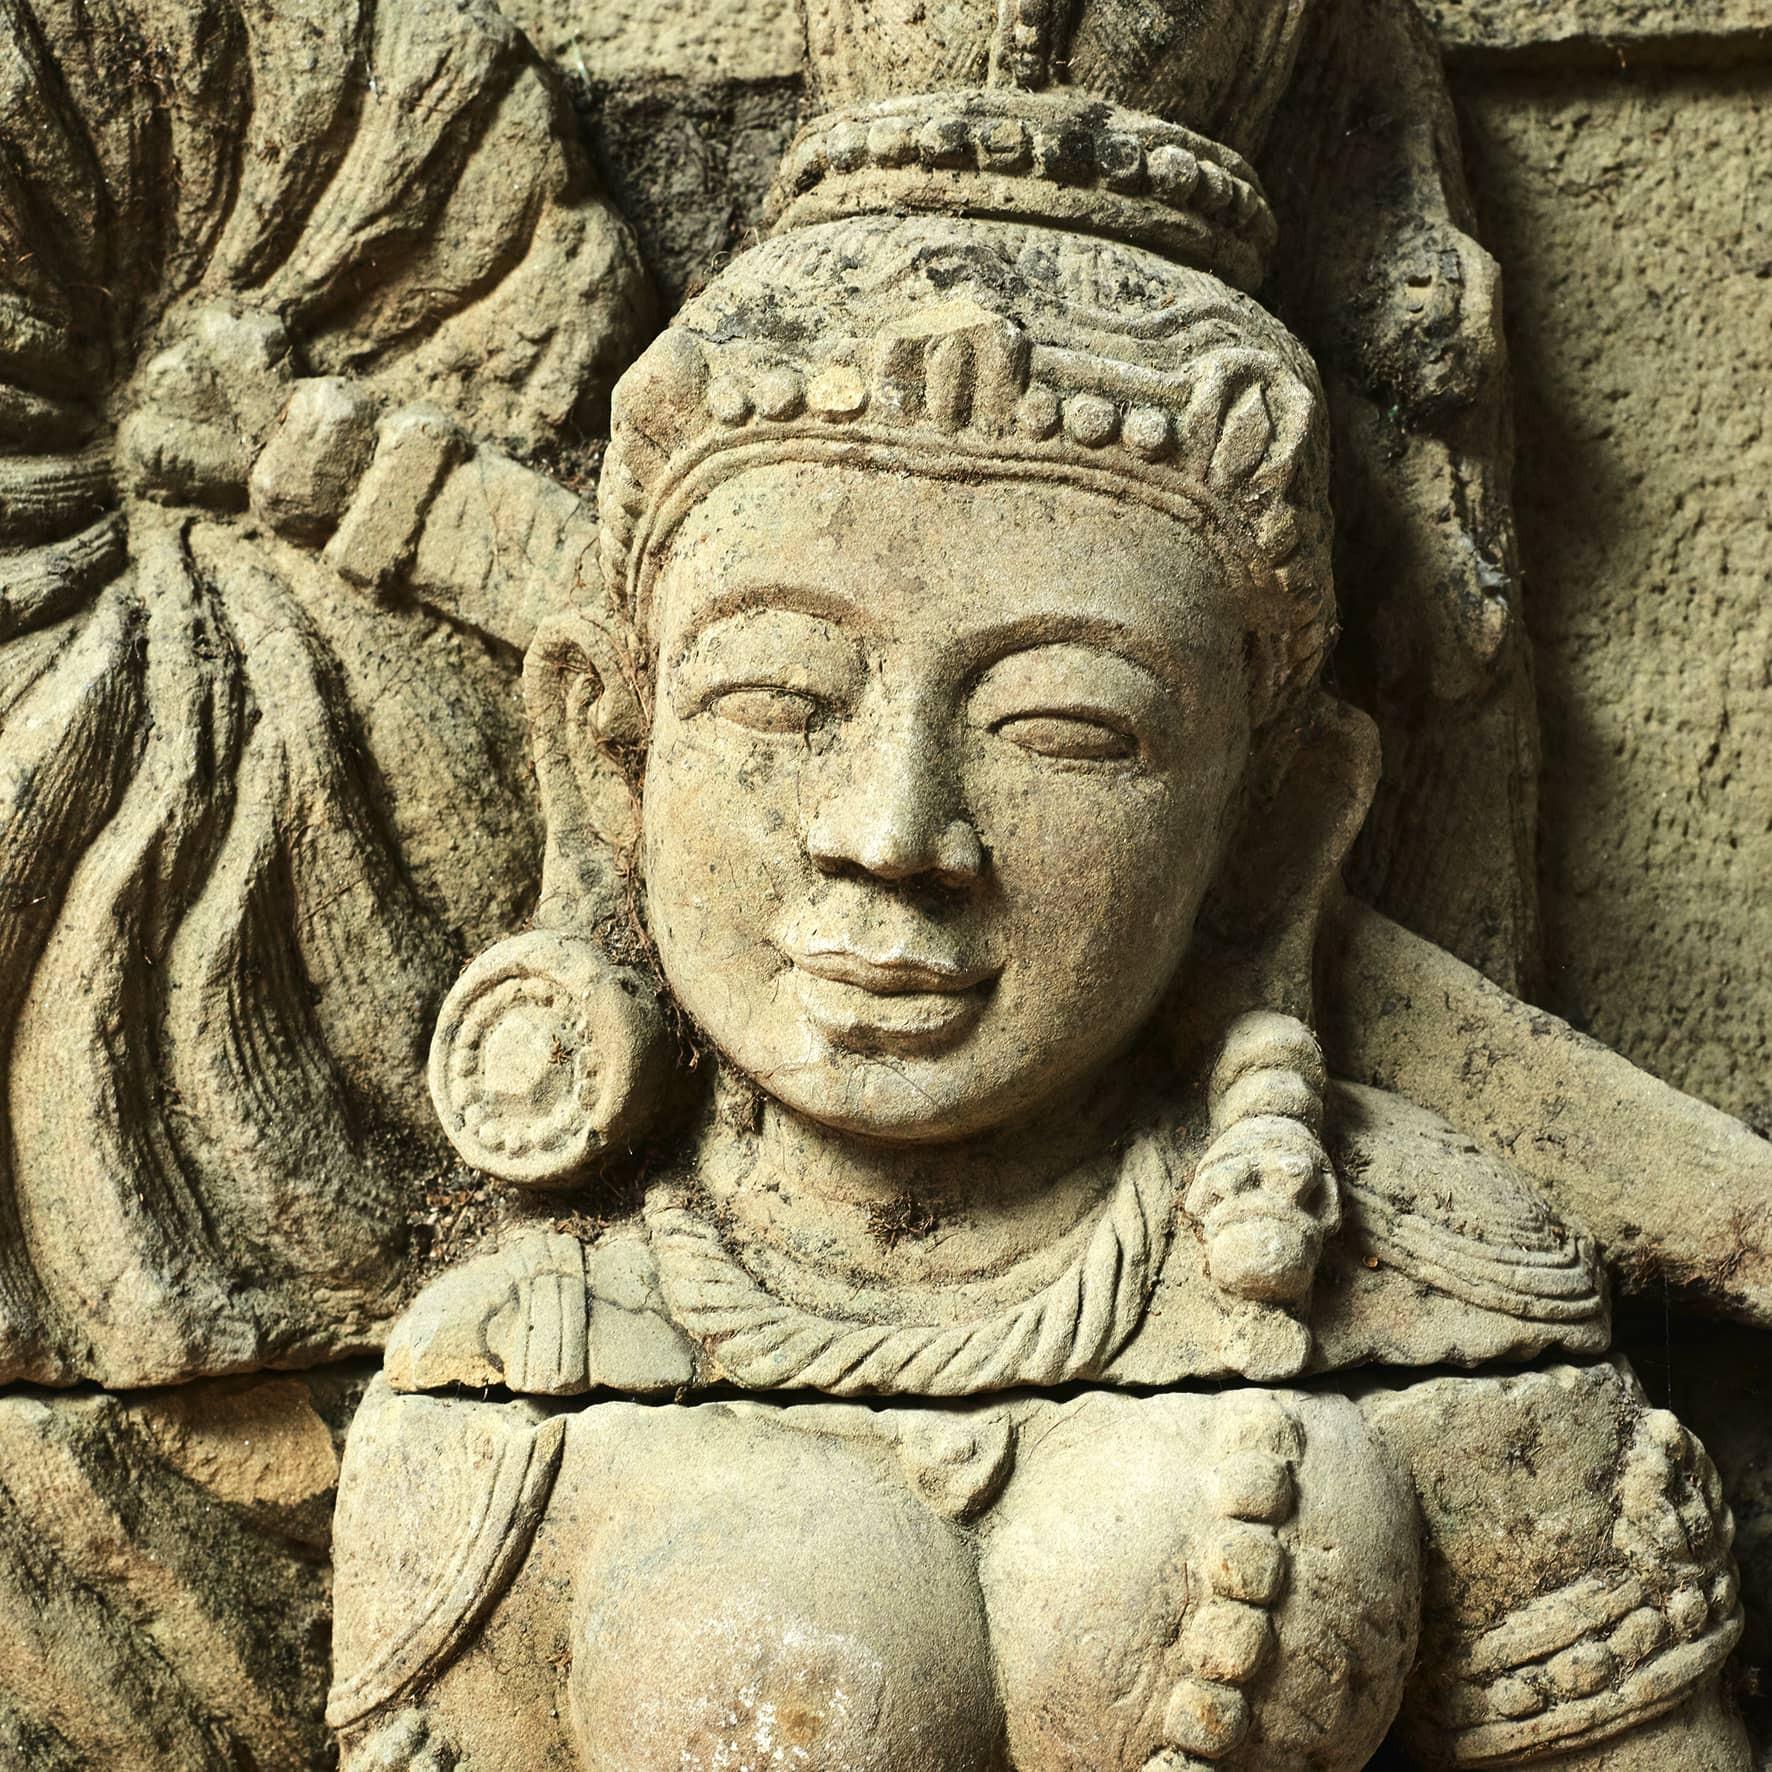 Rare 500-600 year old sandstone relief statue of Saraswati, the goddess of speech, arts, music, knowledge and mind power.
Original in three parts mounted on light sandstone base.
Originates from Arakan, a coastal geographic region in southern